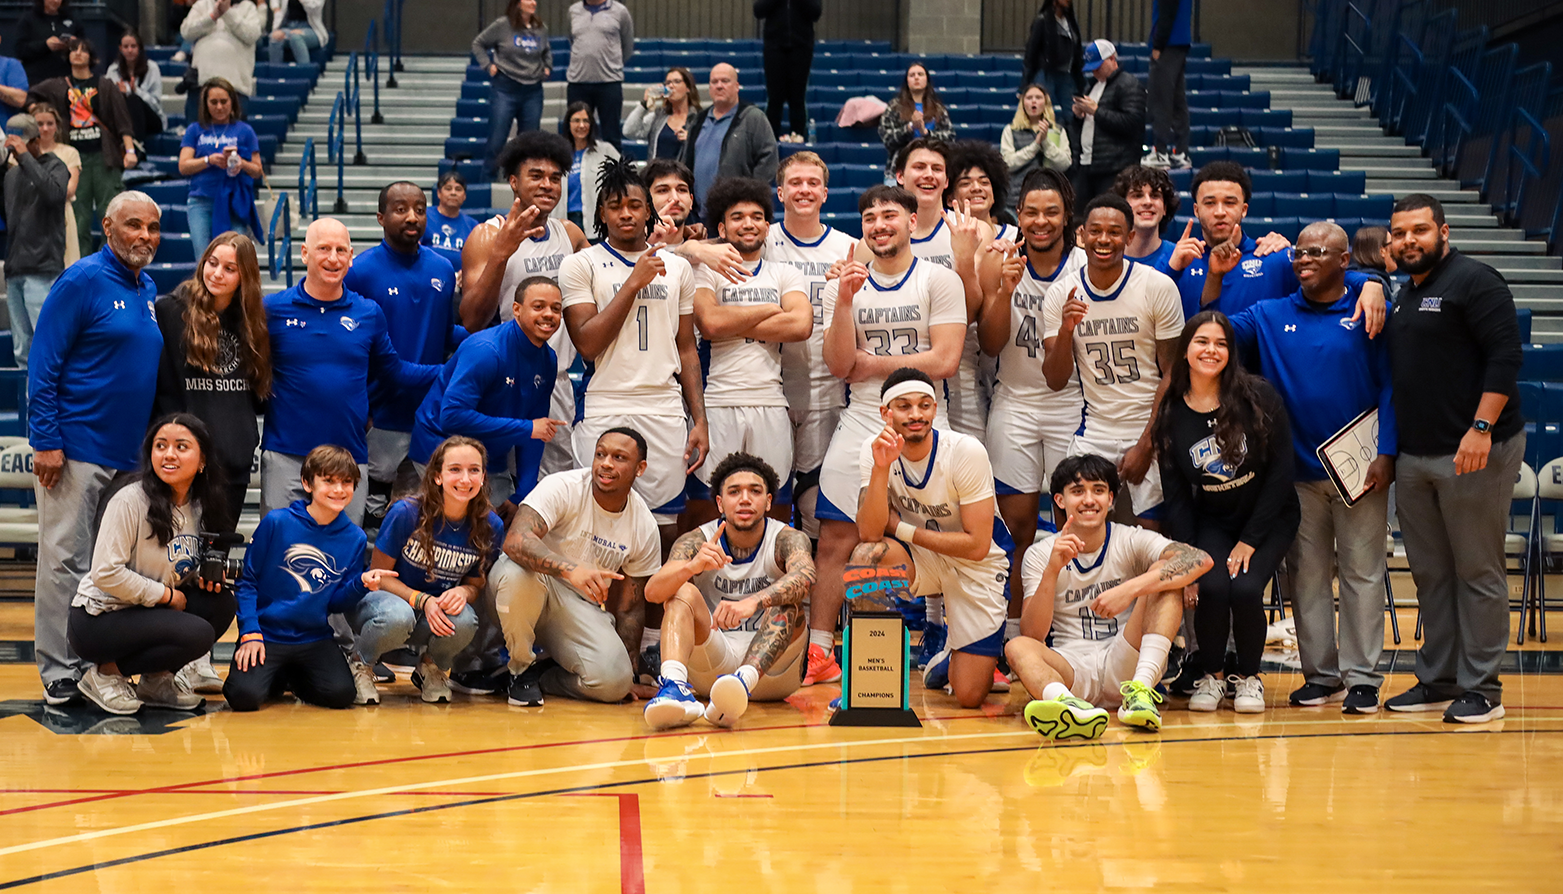 Christopher Newport wins the C2C Men’s Basketball Championship for the third consecutive year